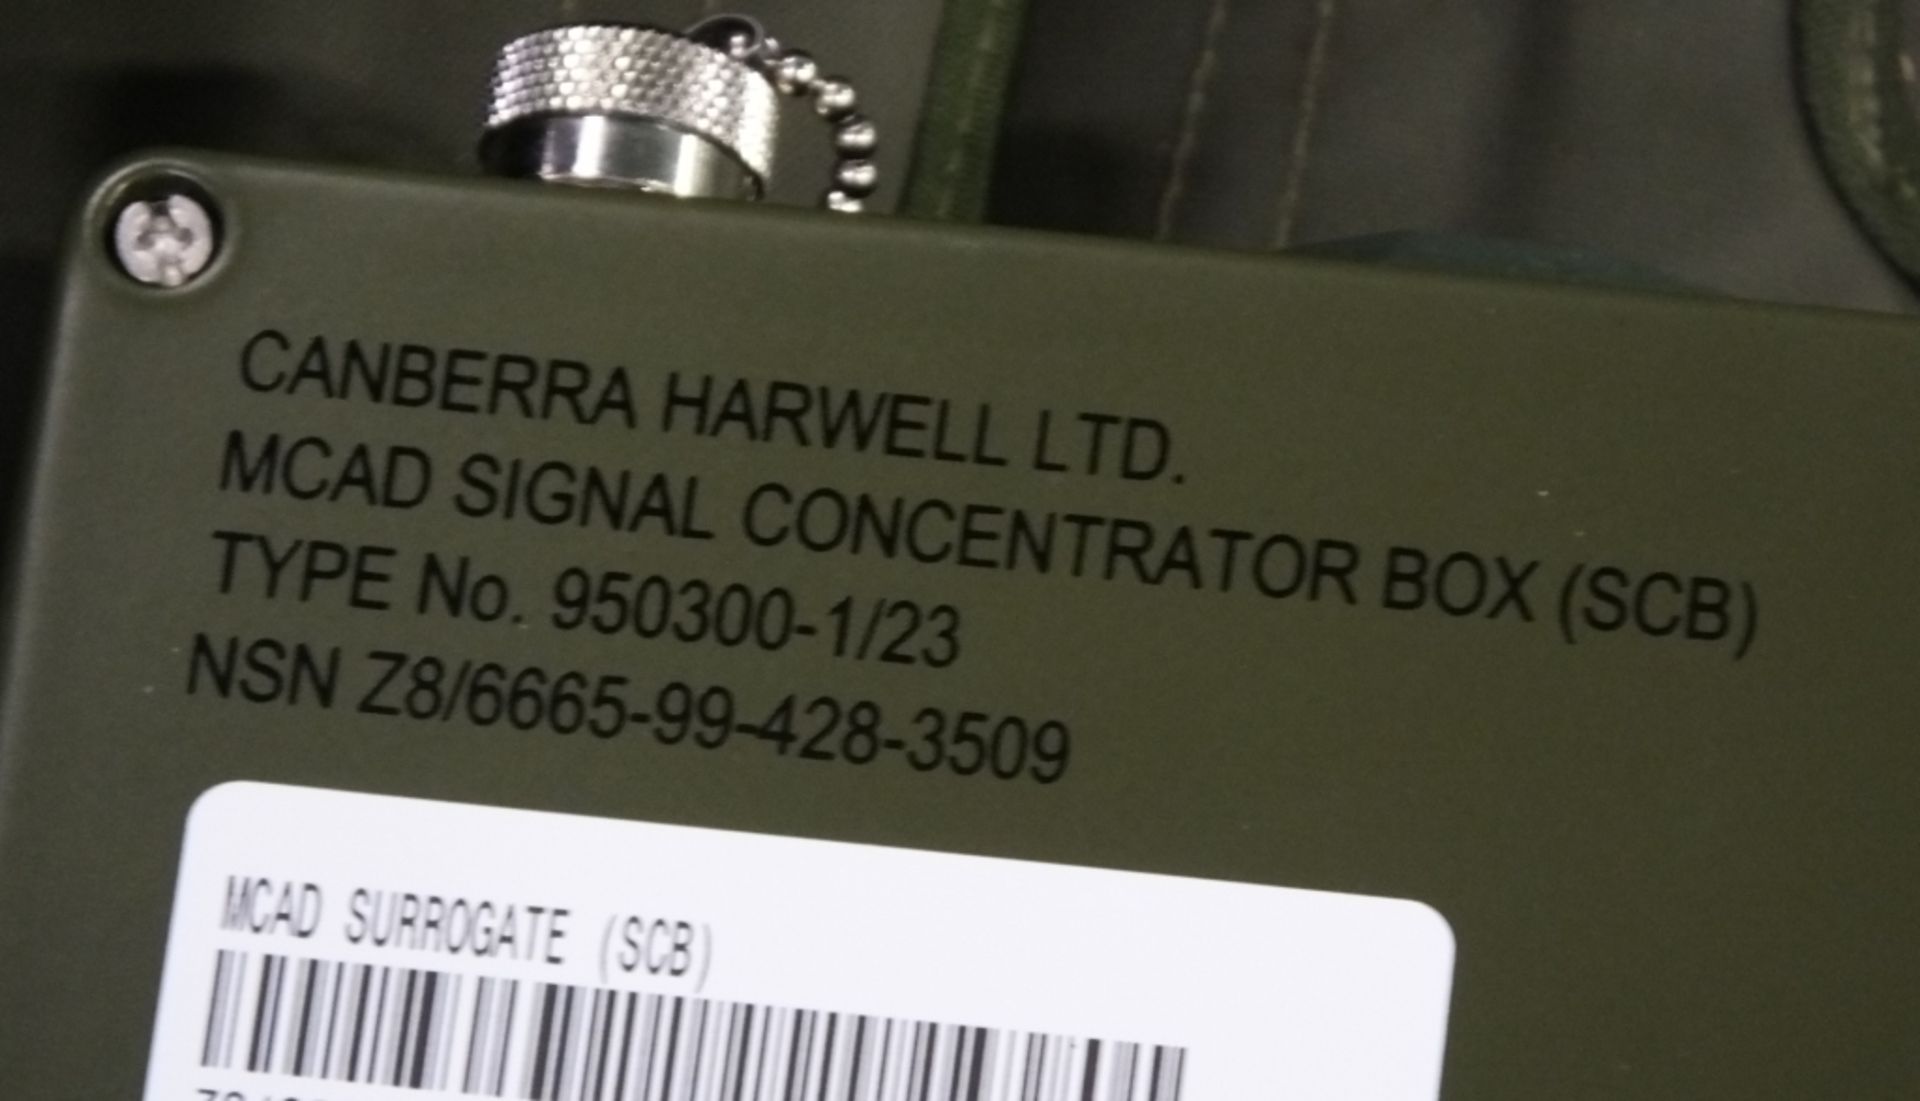 29x Canberra Harwell Ltd MCAD GPS Signal Concentrator Box (SCB) type-950300-1/23 NSN- Z8/6 - Image 3 of 4